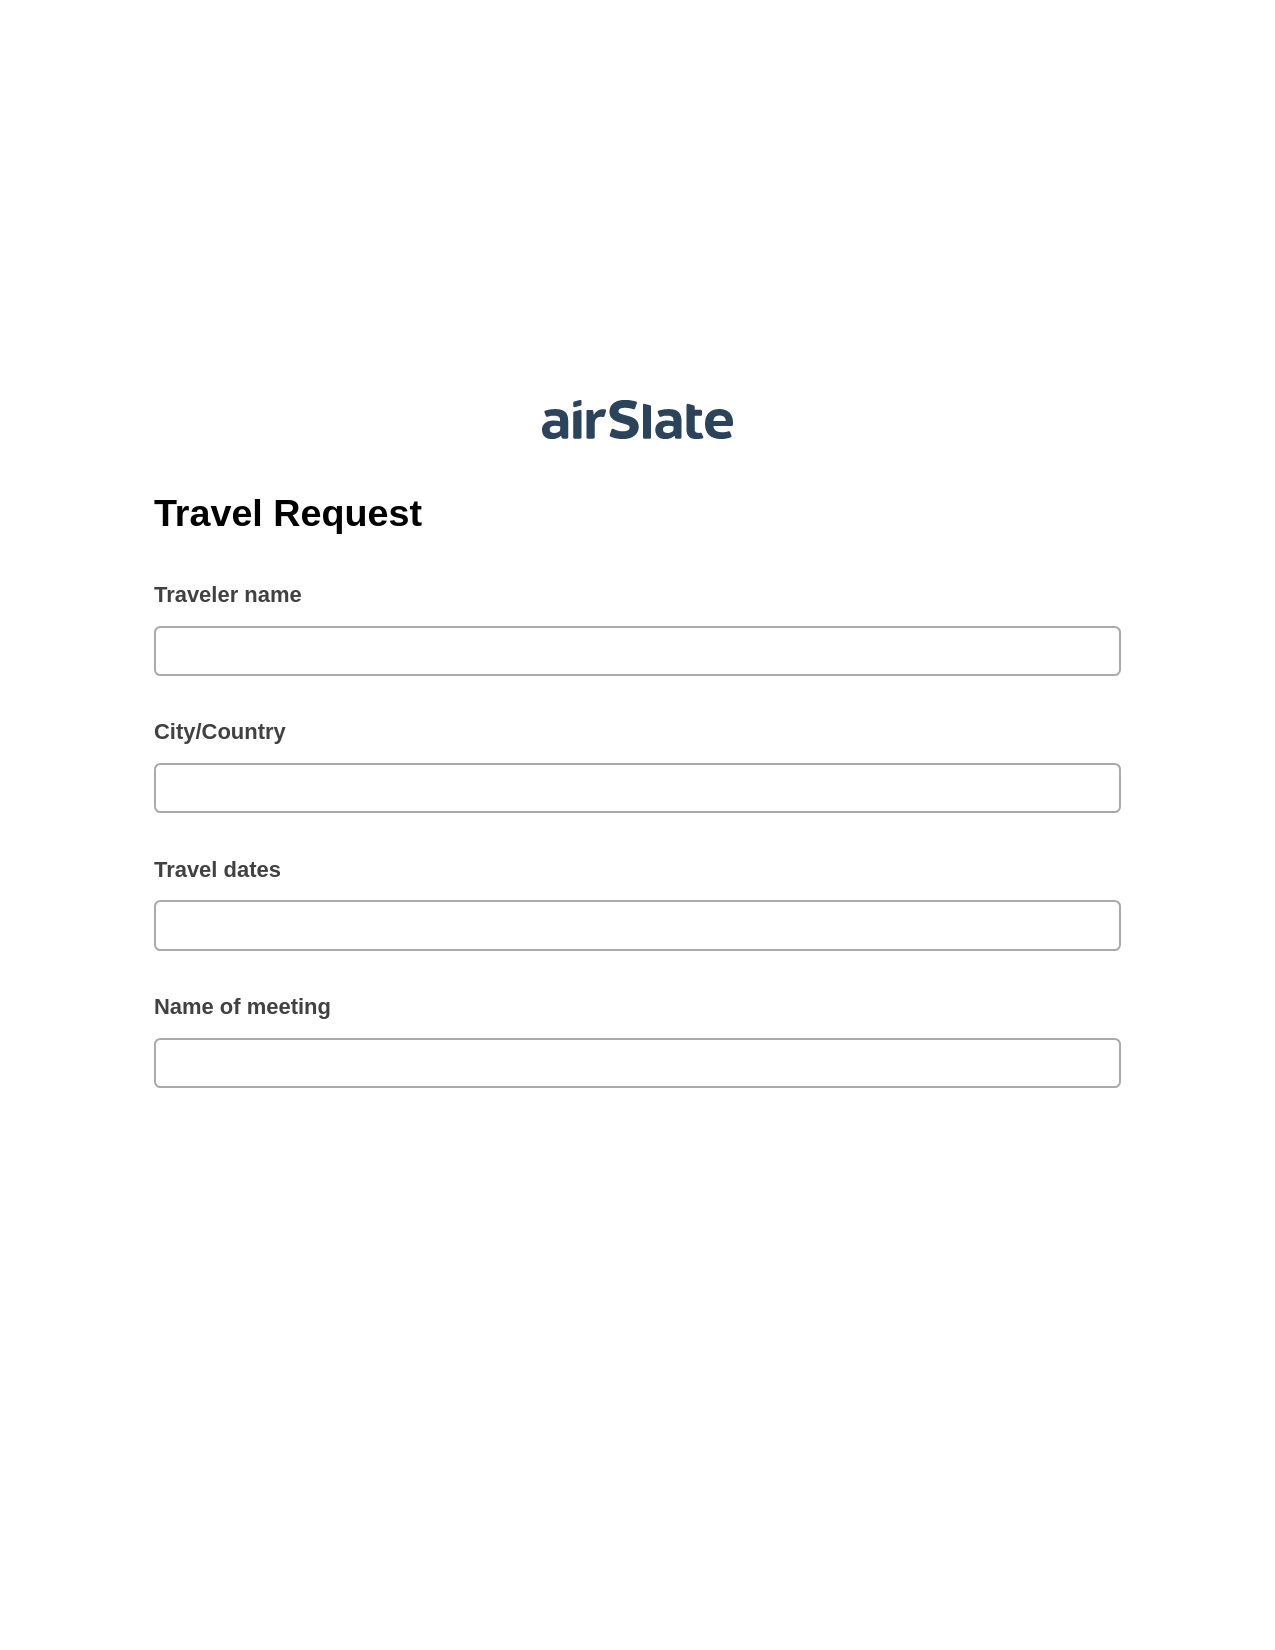 Travel Request Pre-fill from CSV File Bot, Add Tags to Slate Bot, Export to Excel 365 Bot